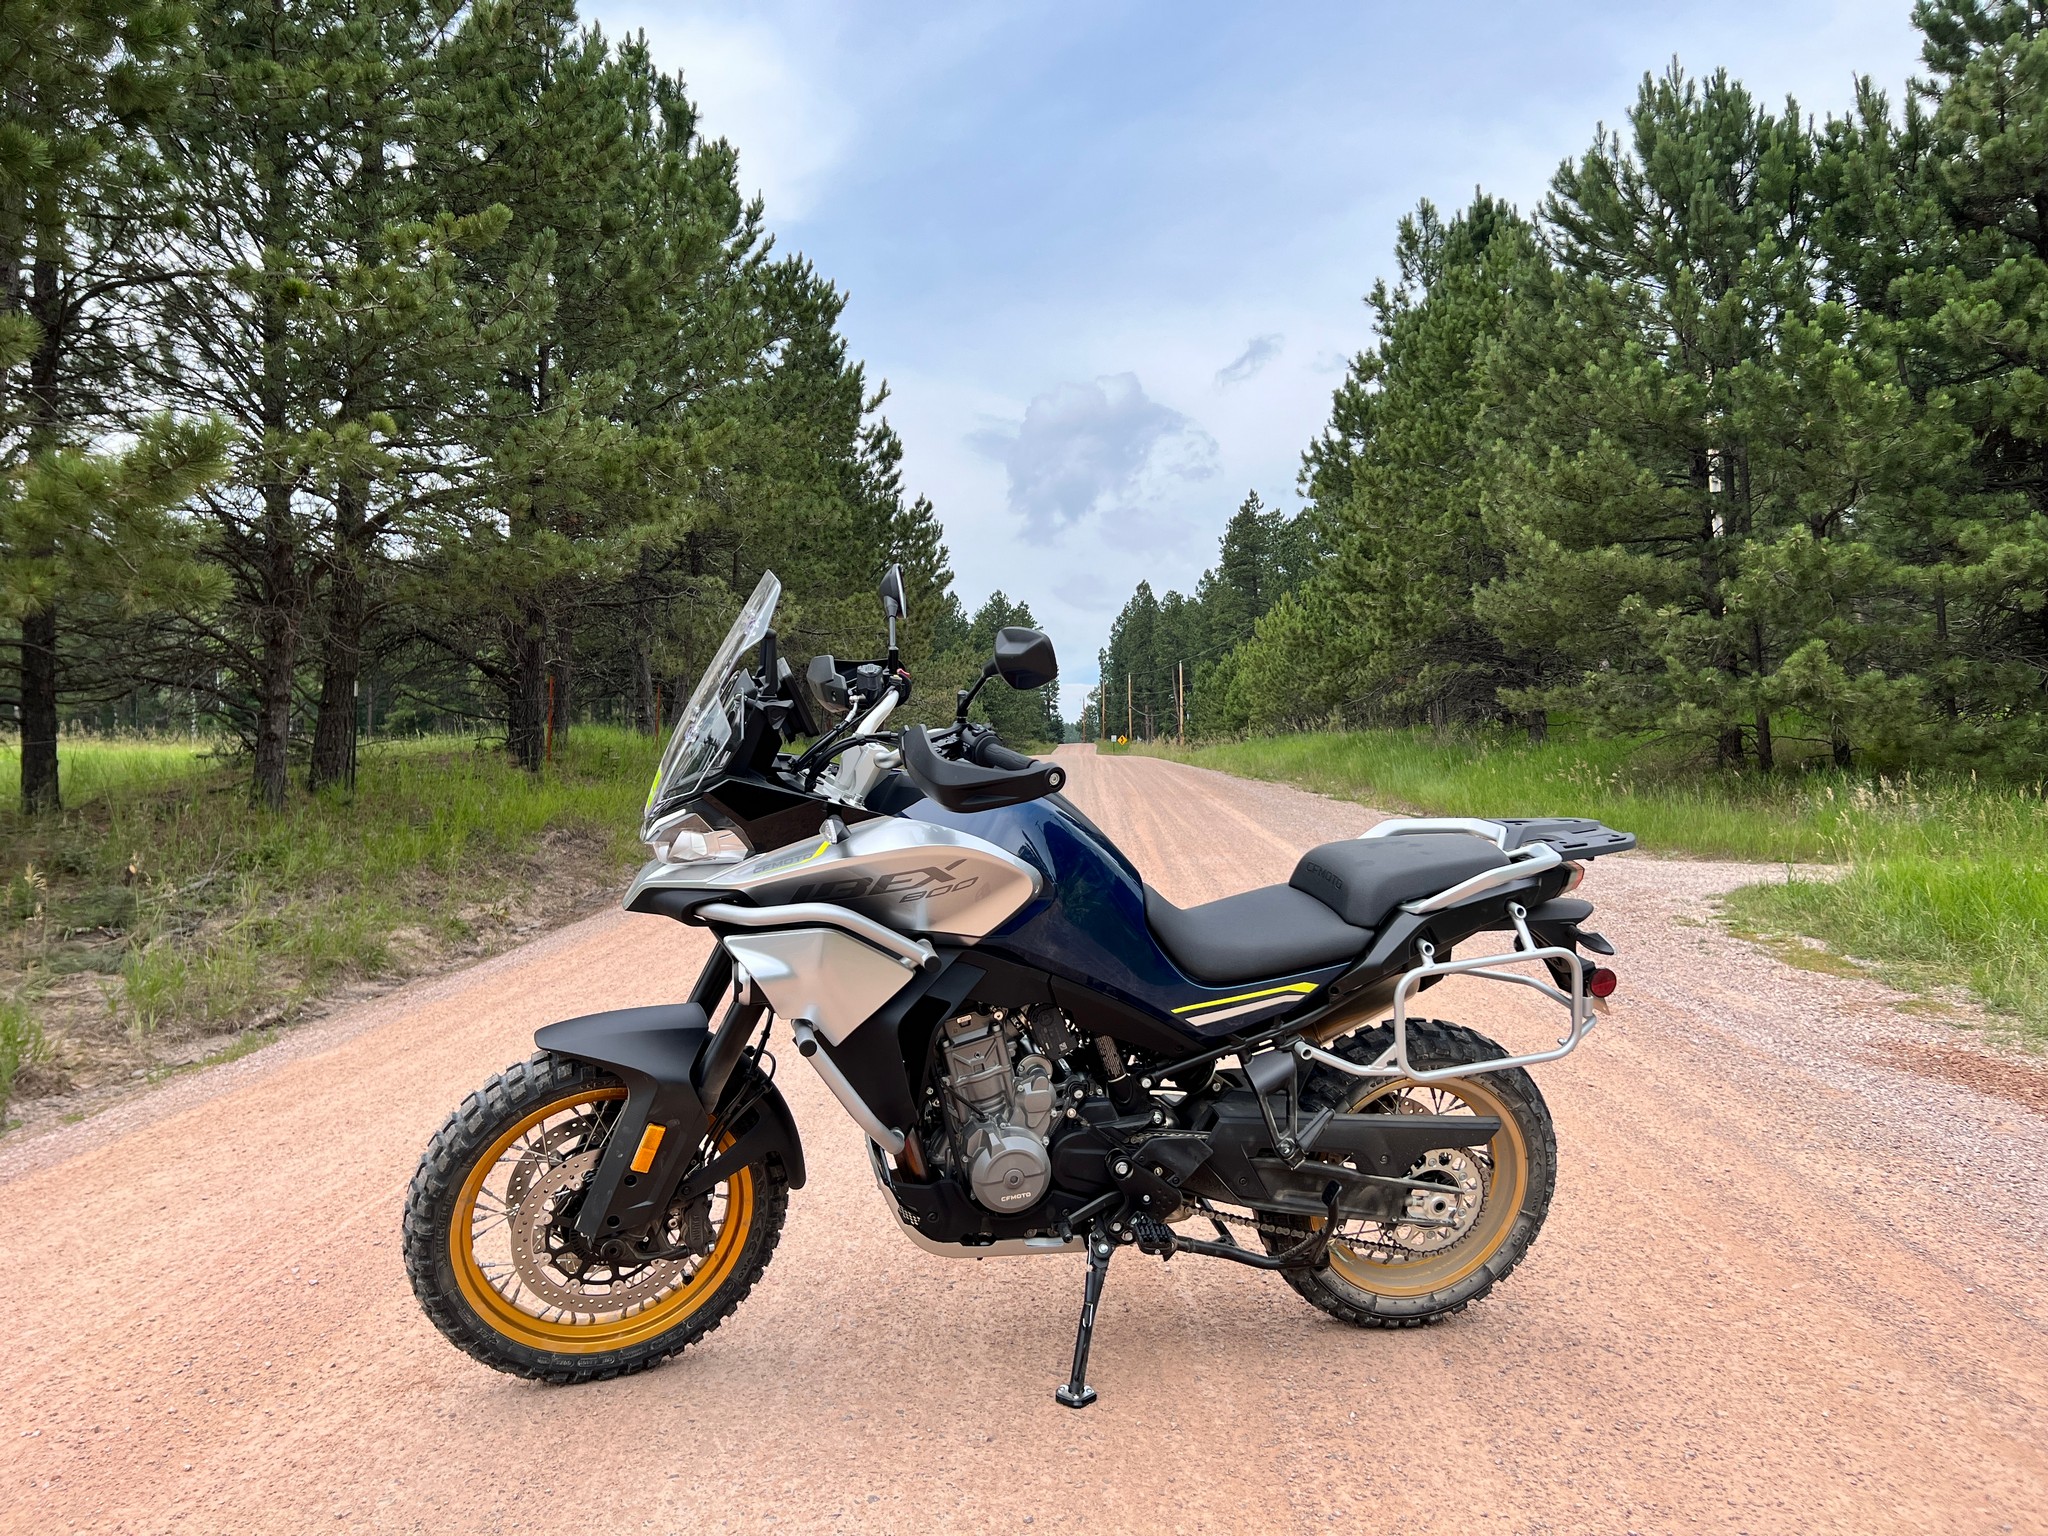 The CFMoto Ibex 800T on a dirt road somewhere in the Black Hills.